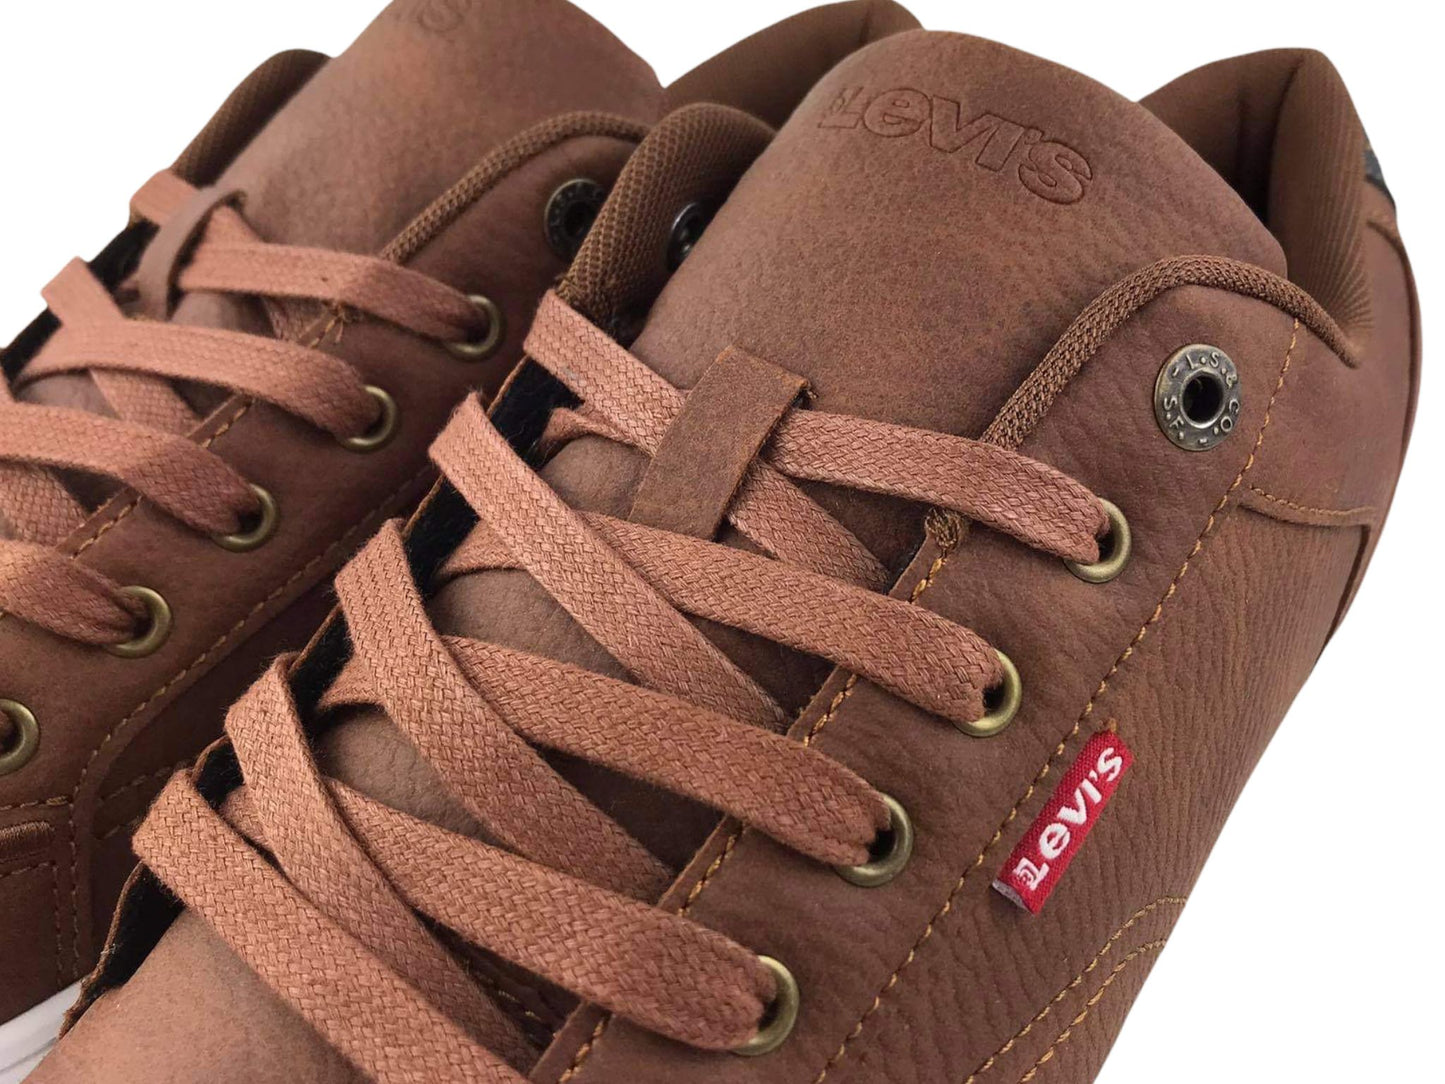 Levi's | Men's street sneakers or tennis shoes with brown Courtright eco-leather laces